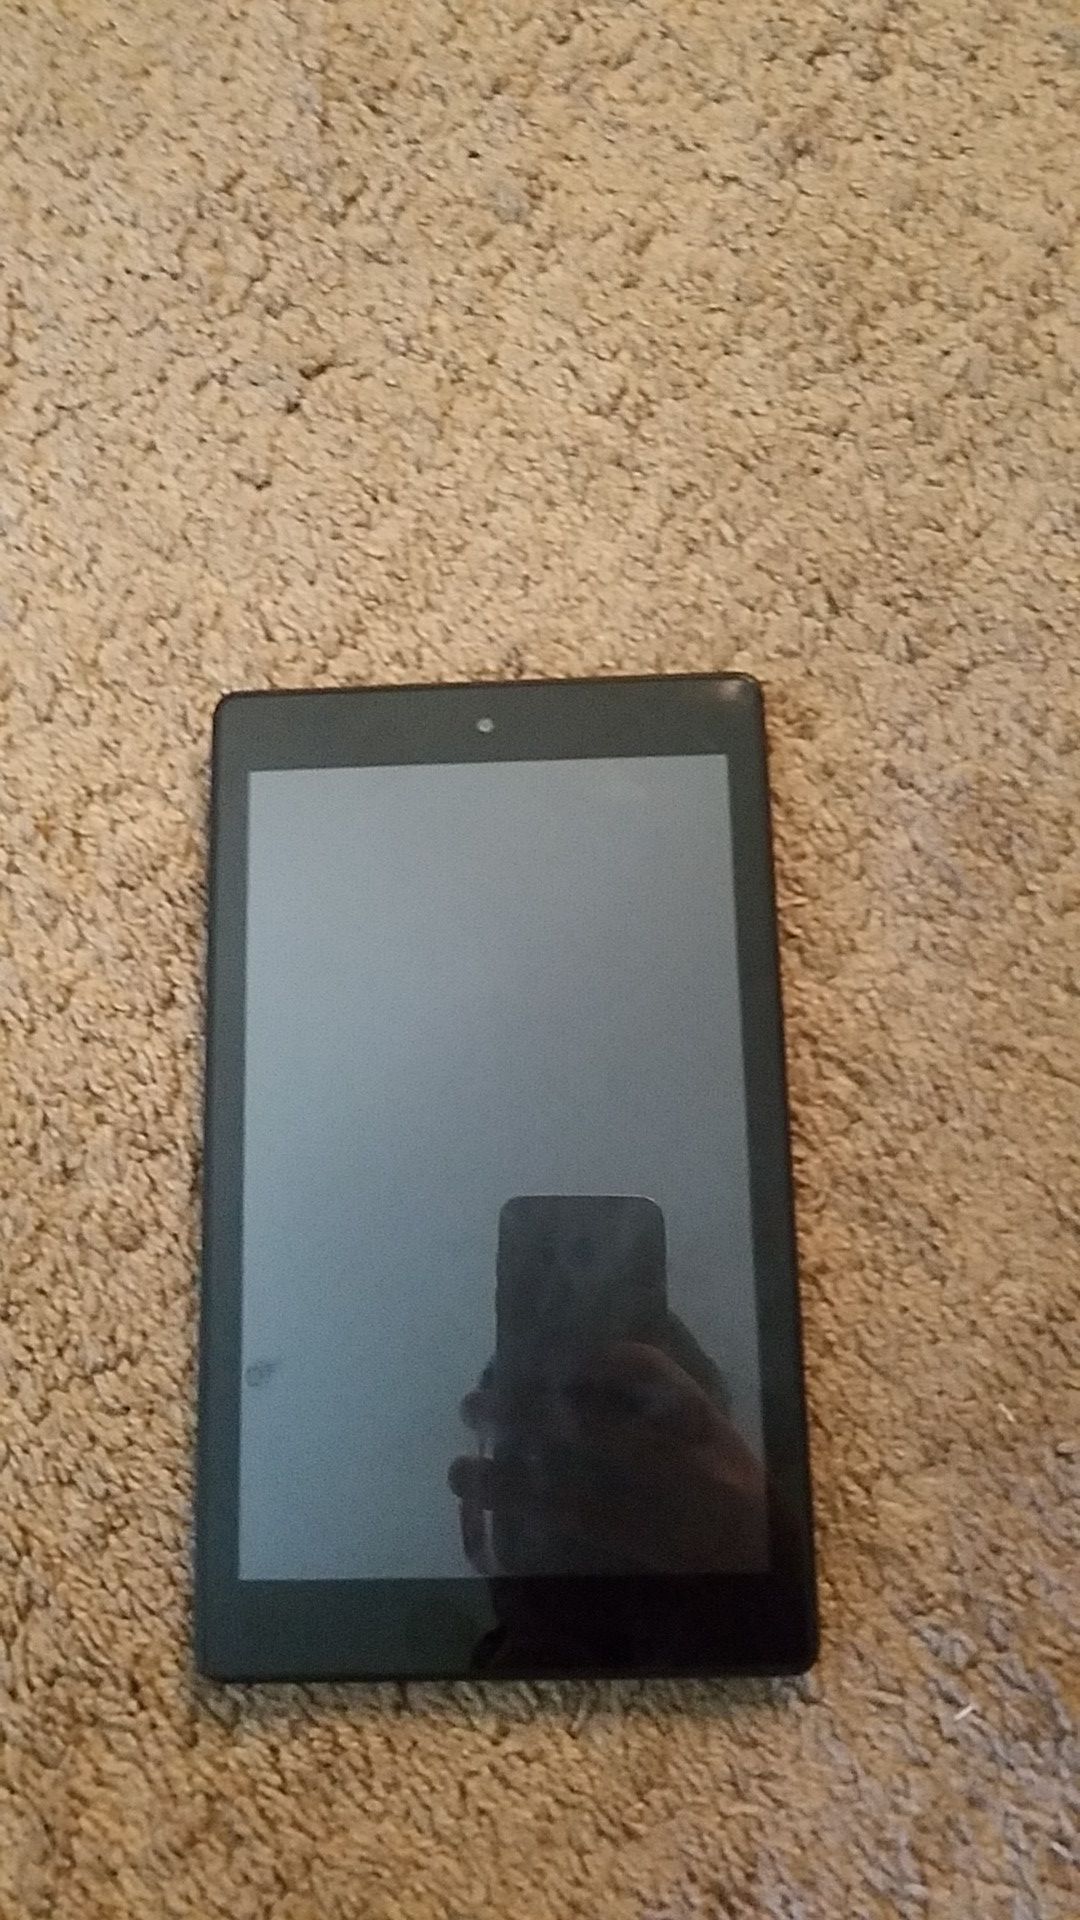 Like new amazon fire 8 inch tablet